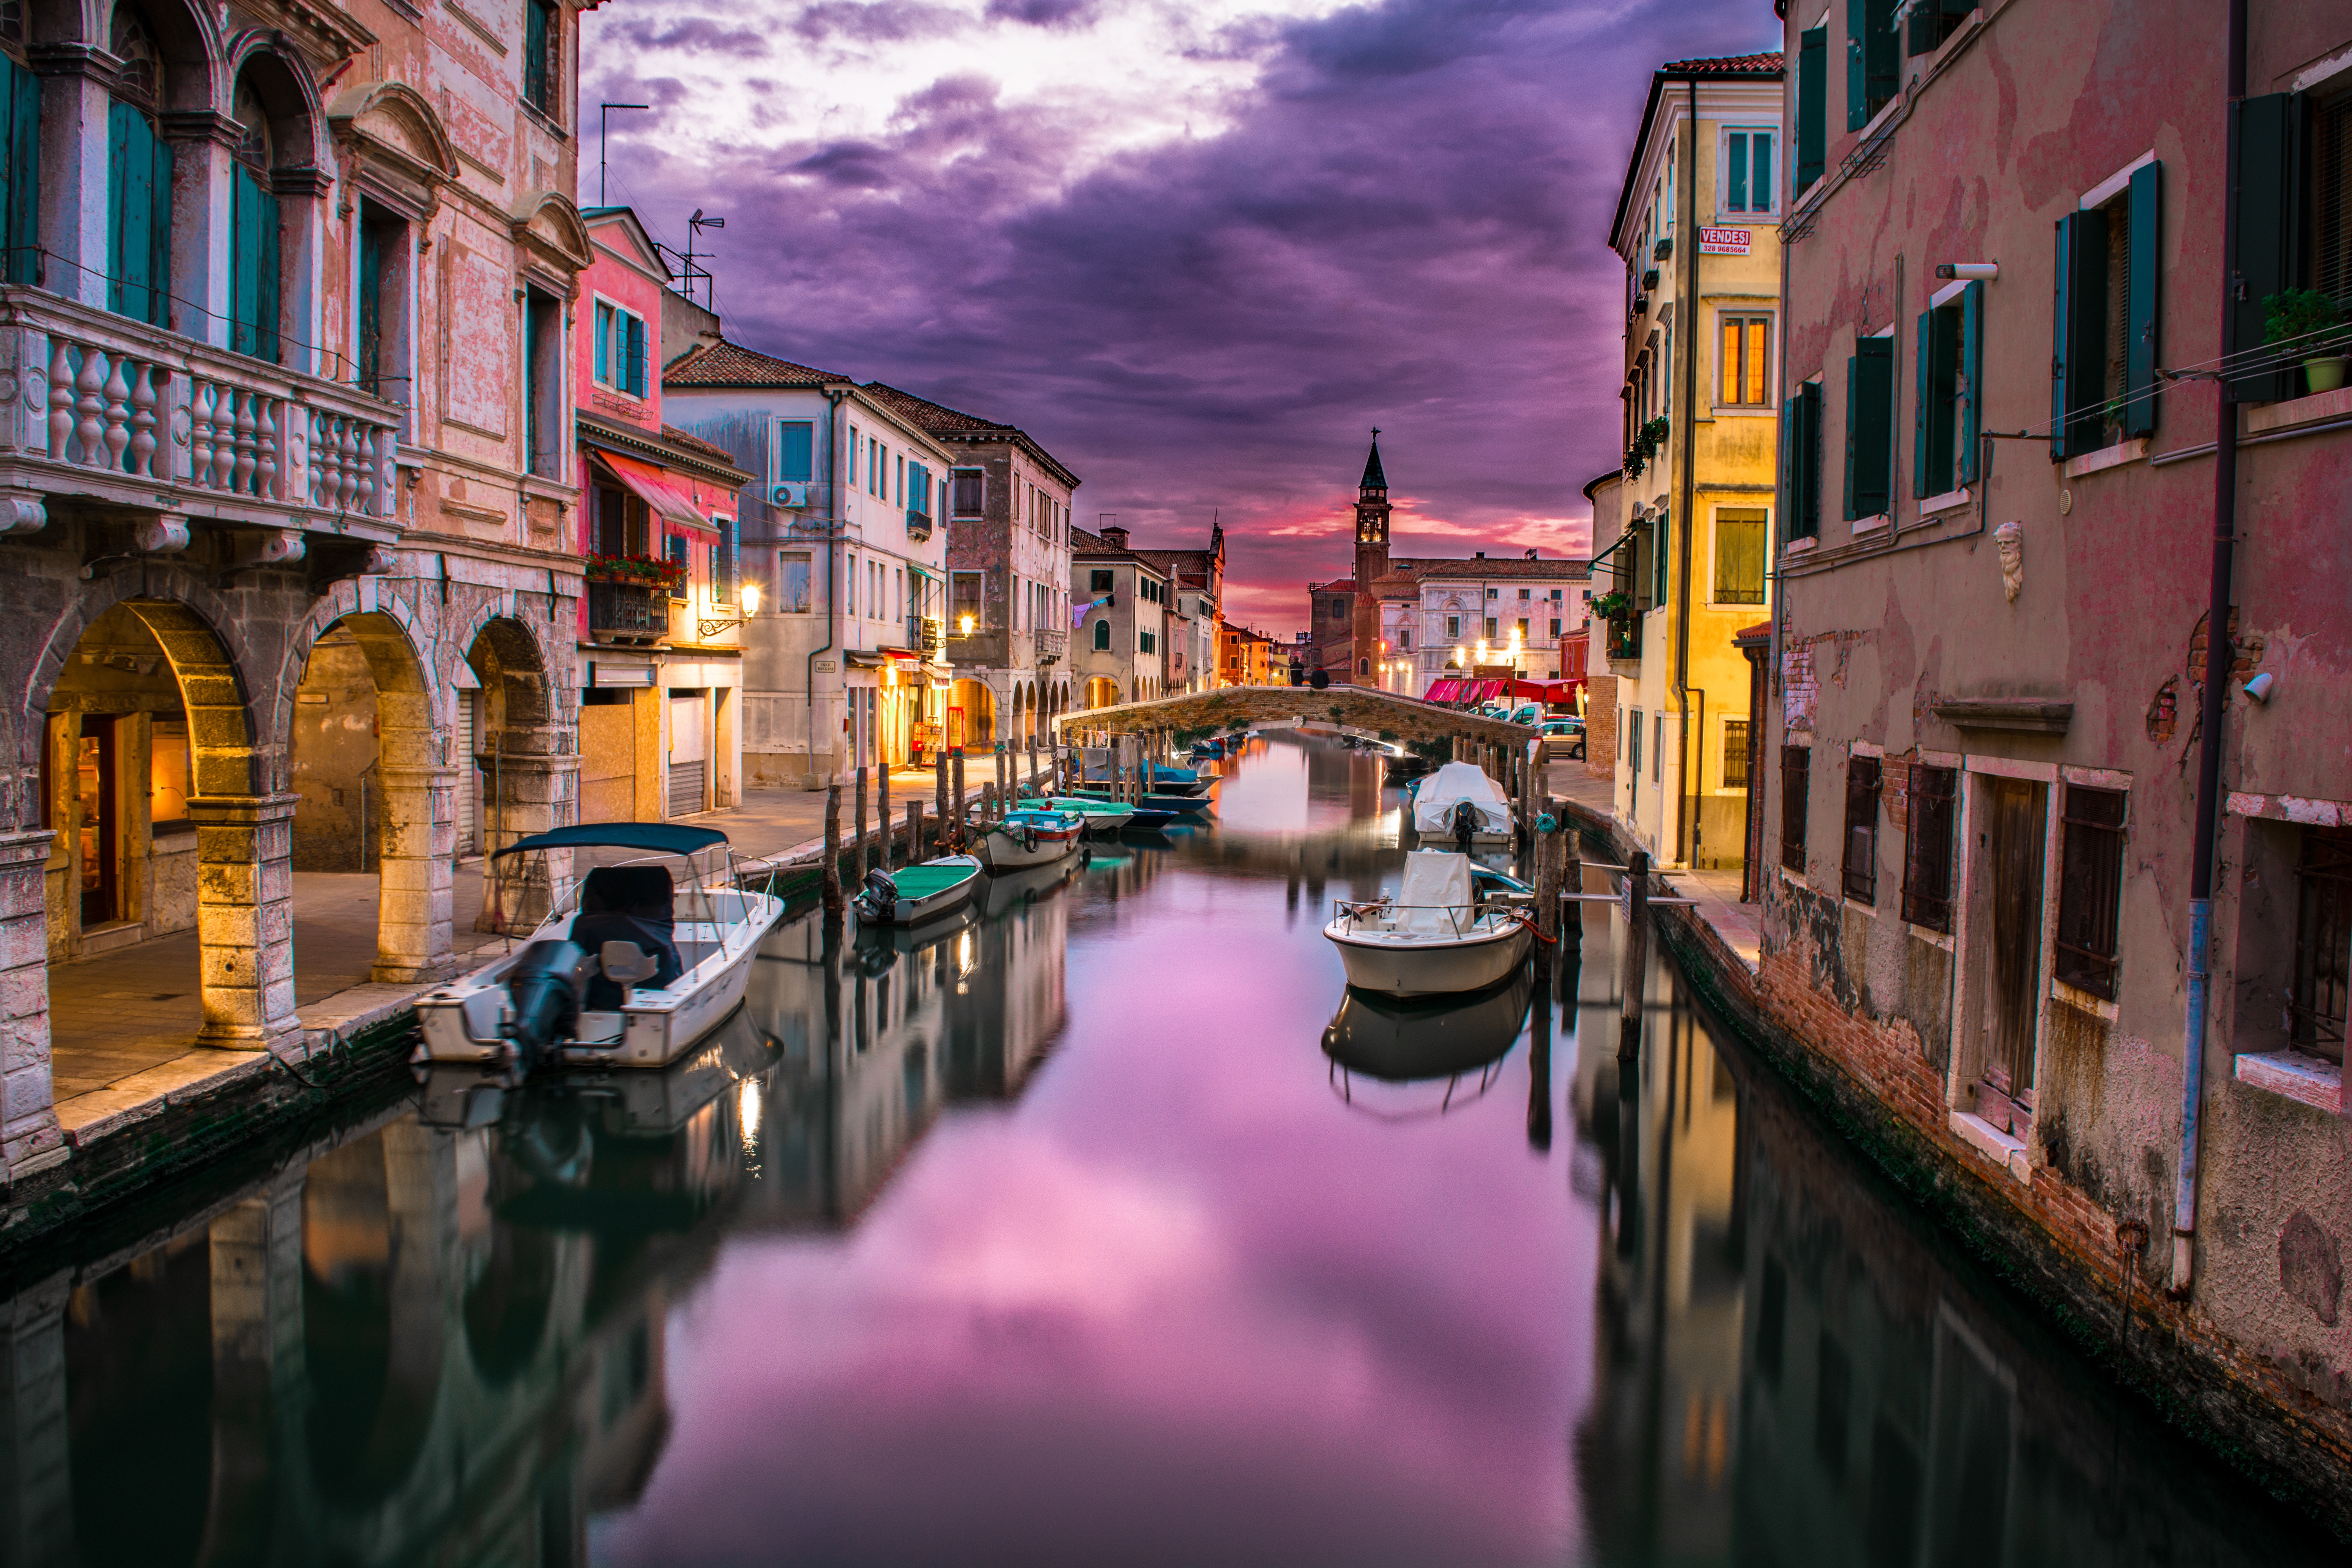 venice, reflection, man made, boat, canal, chioggia, house, sunset, cities